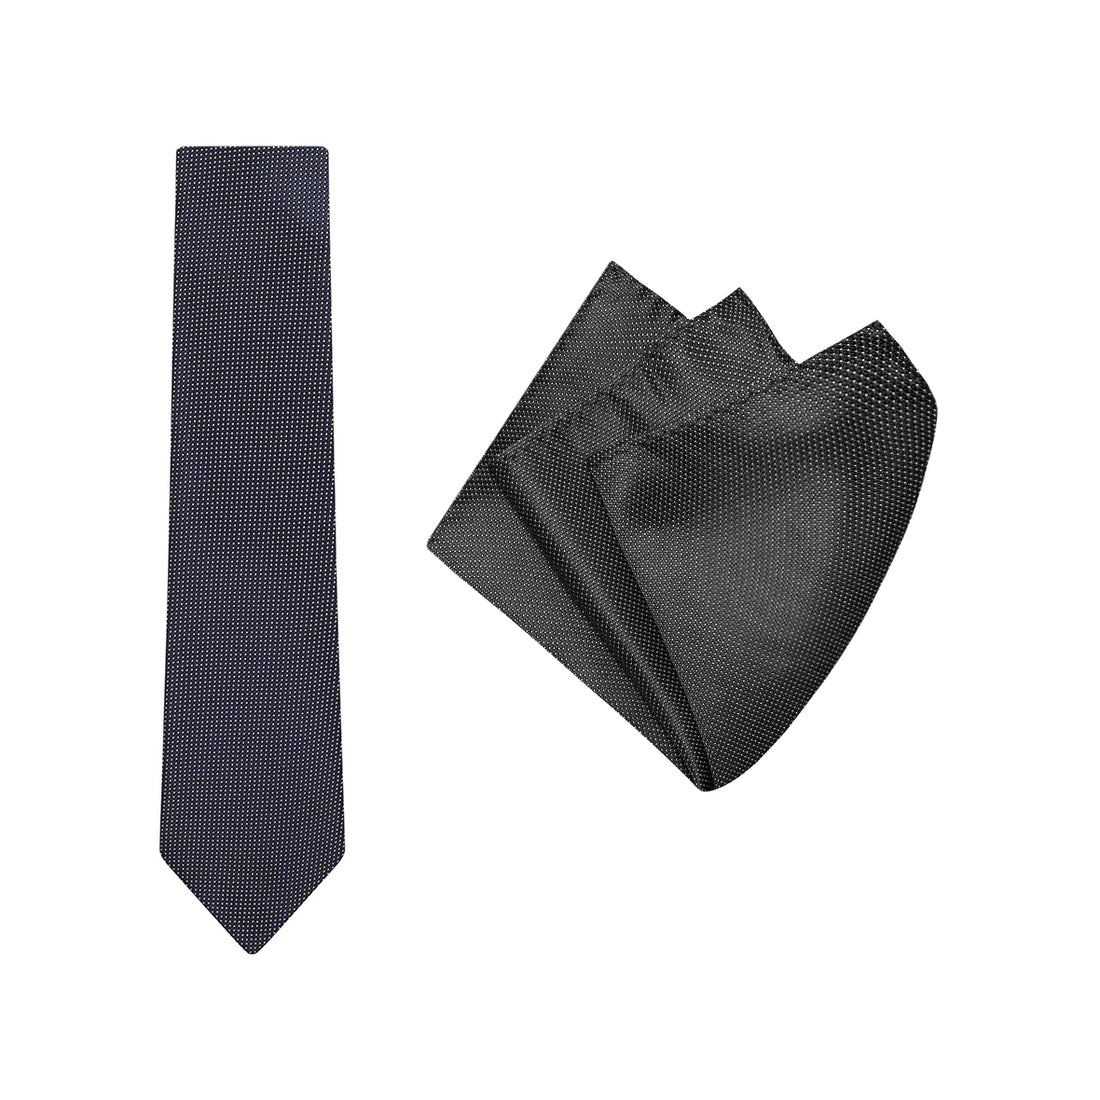 TIE + POCKET SQUARE SET. Micro Spot. Black. Supplied with matching pocket square.-Ties-PEROZ Accessories